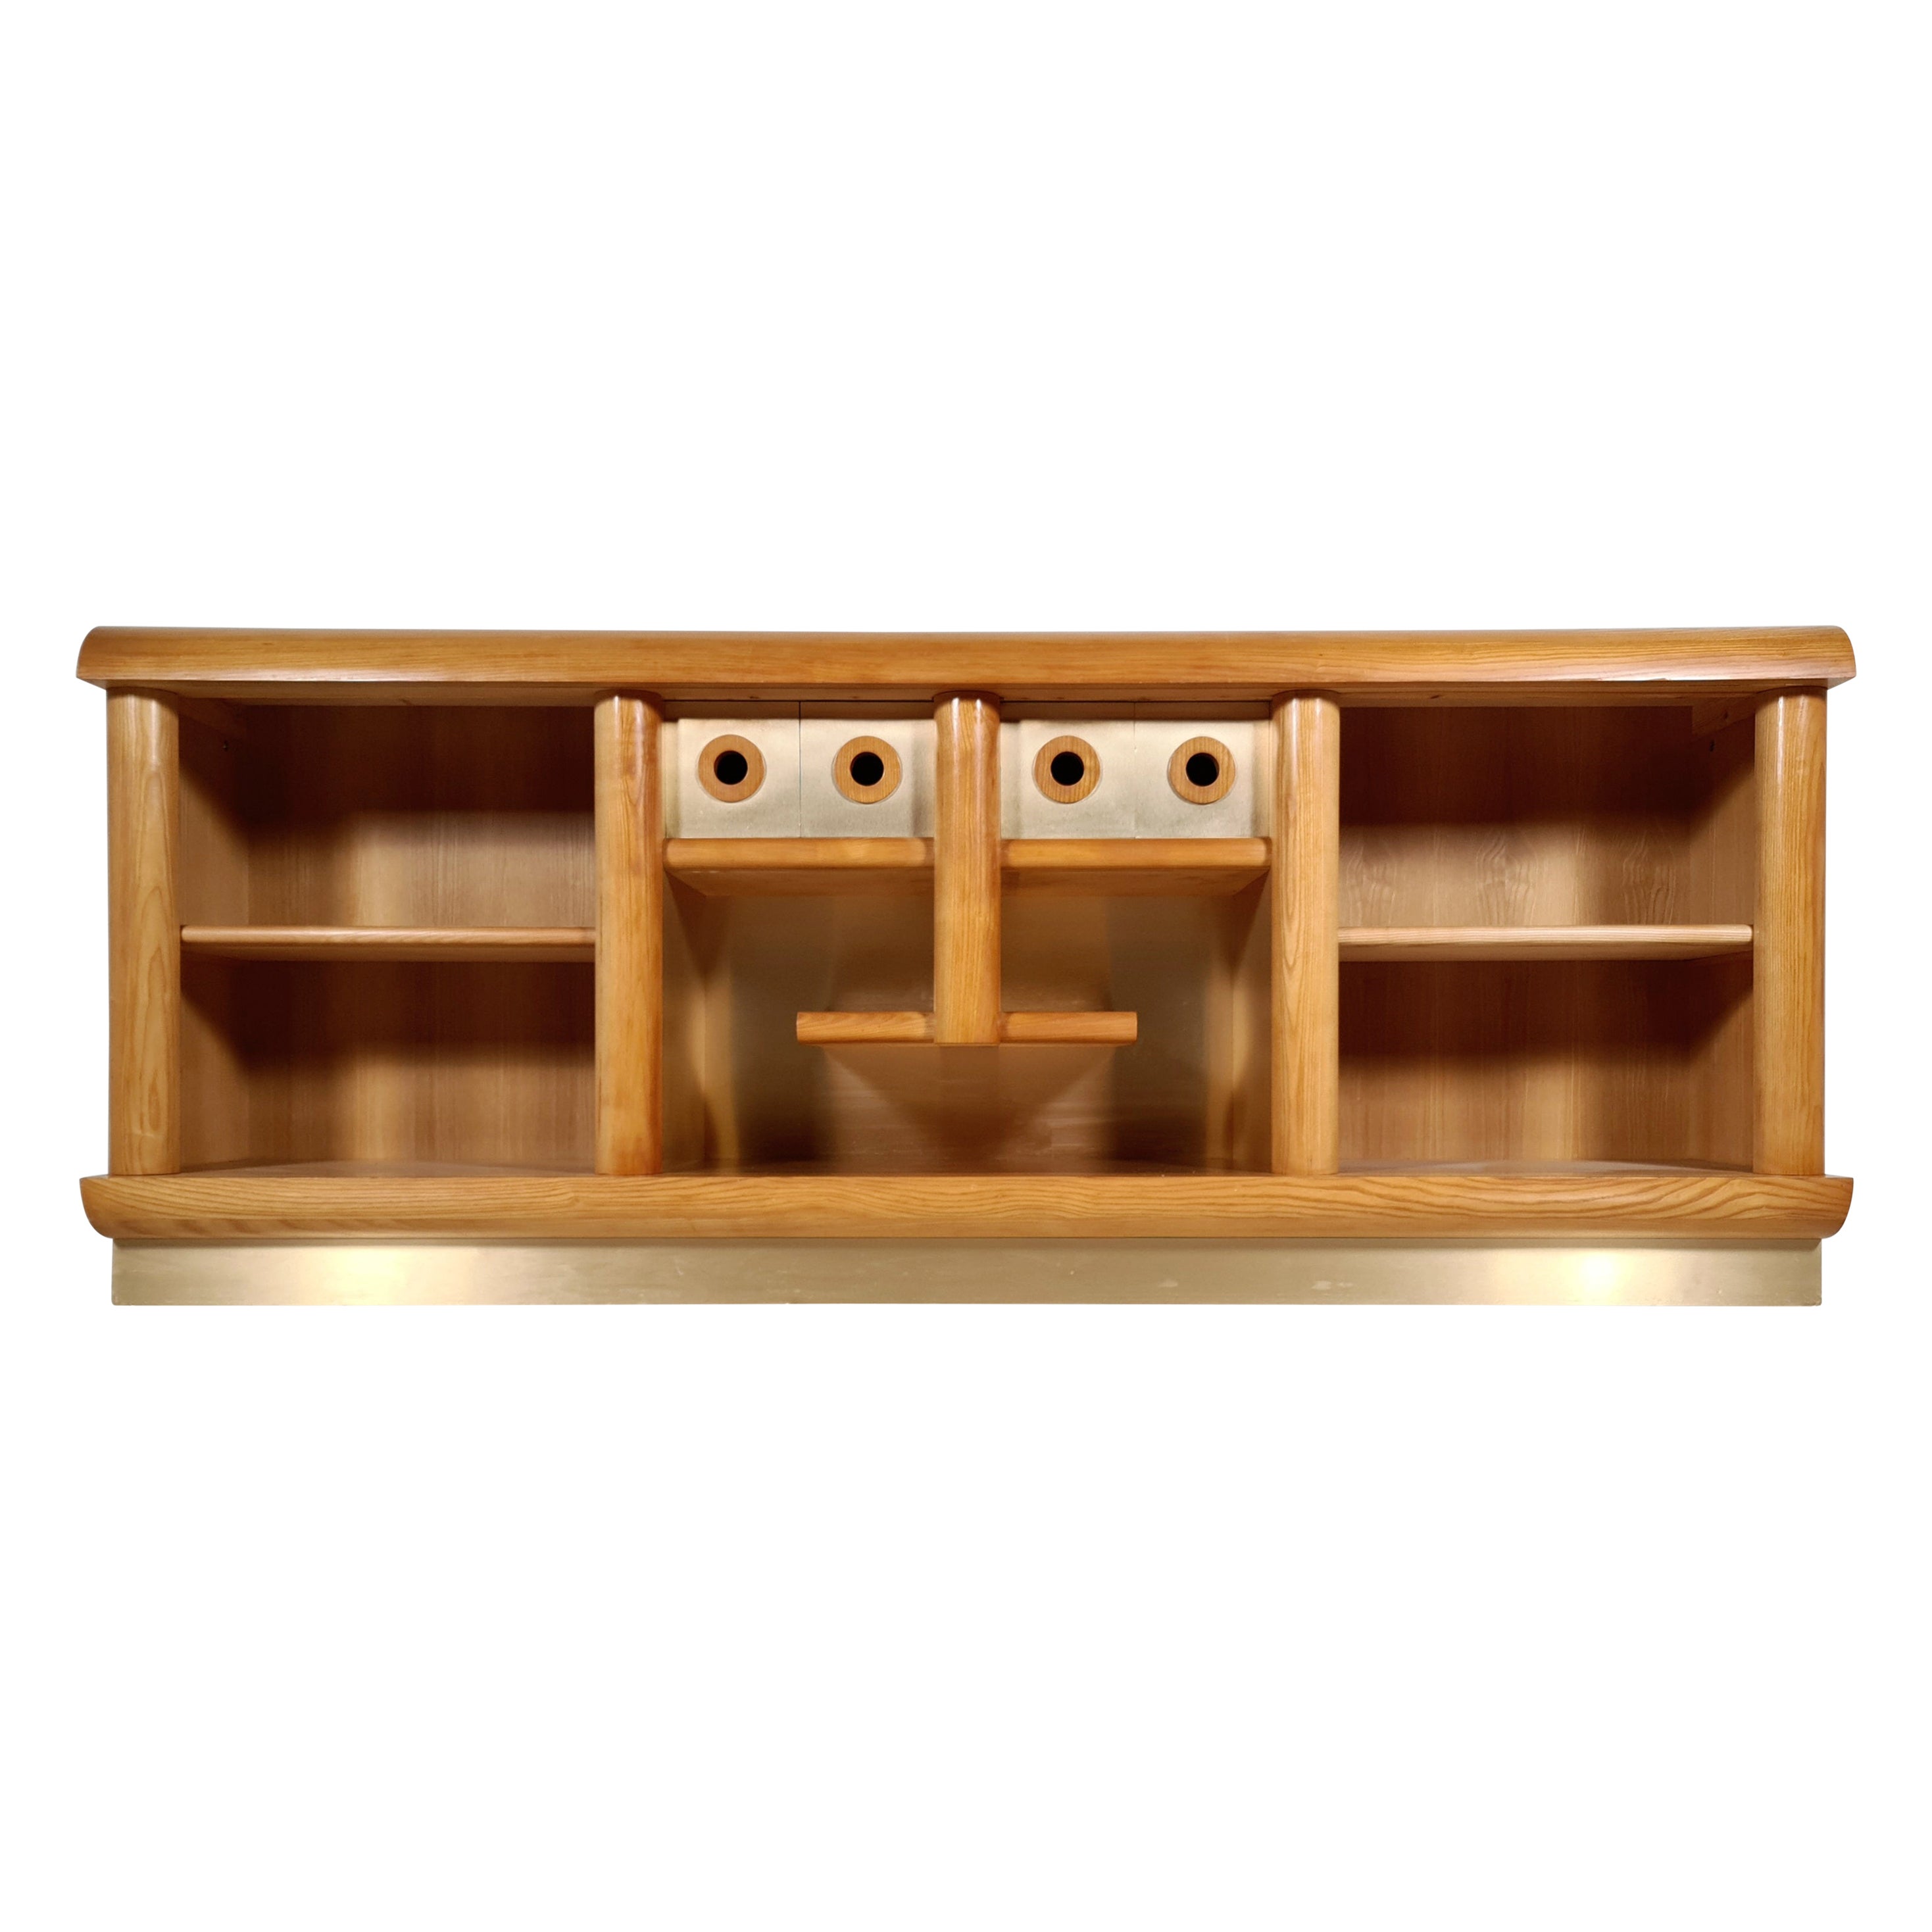 Sideboard/Credenza in Oak and Brushed Brass, Italy, 1970s